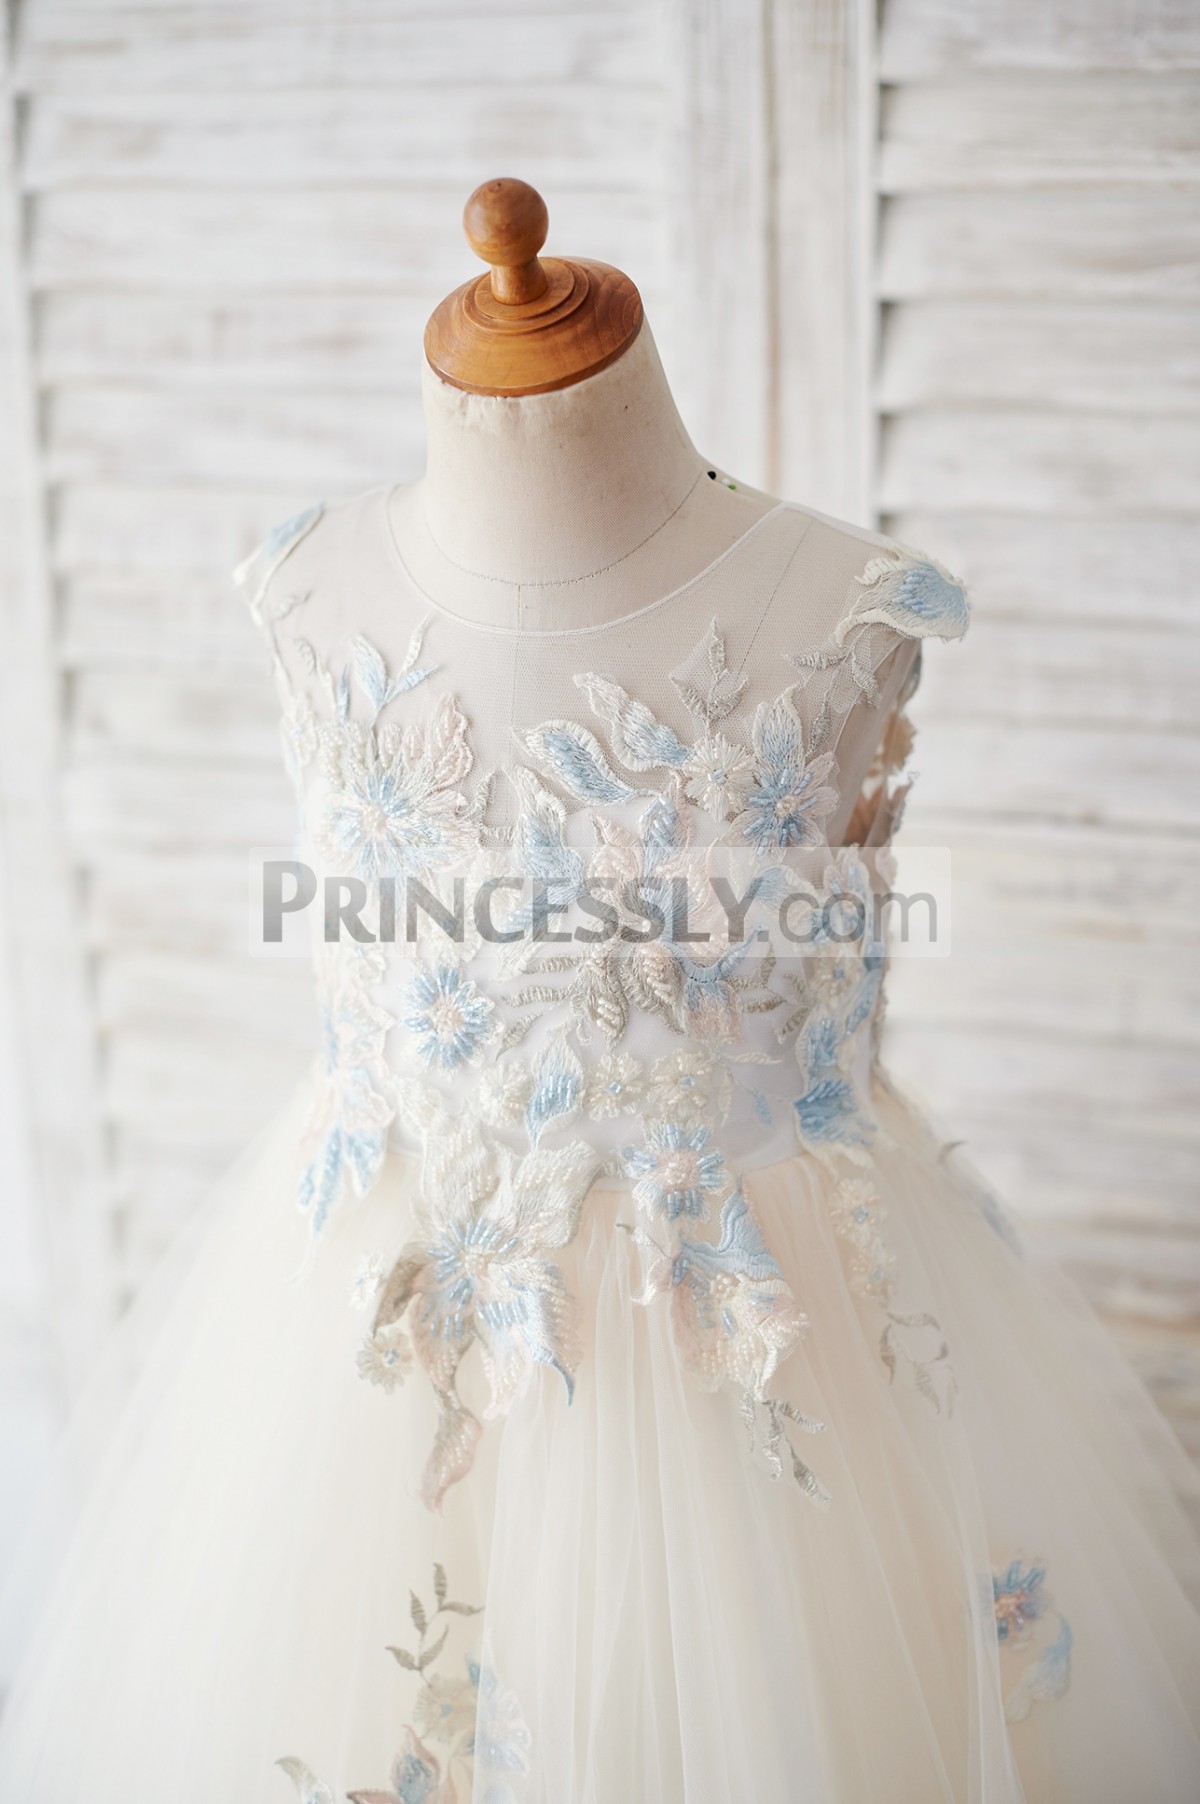 Two-tone colored lace bodice is small cap sleeves